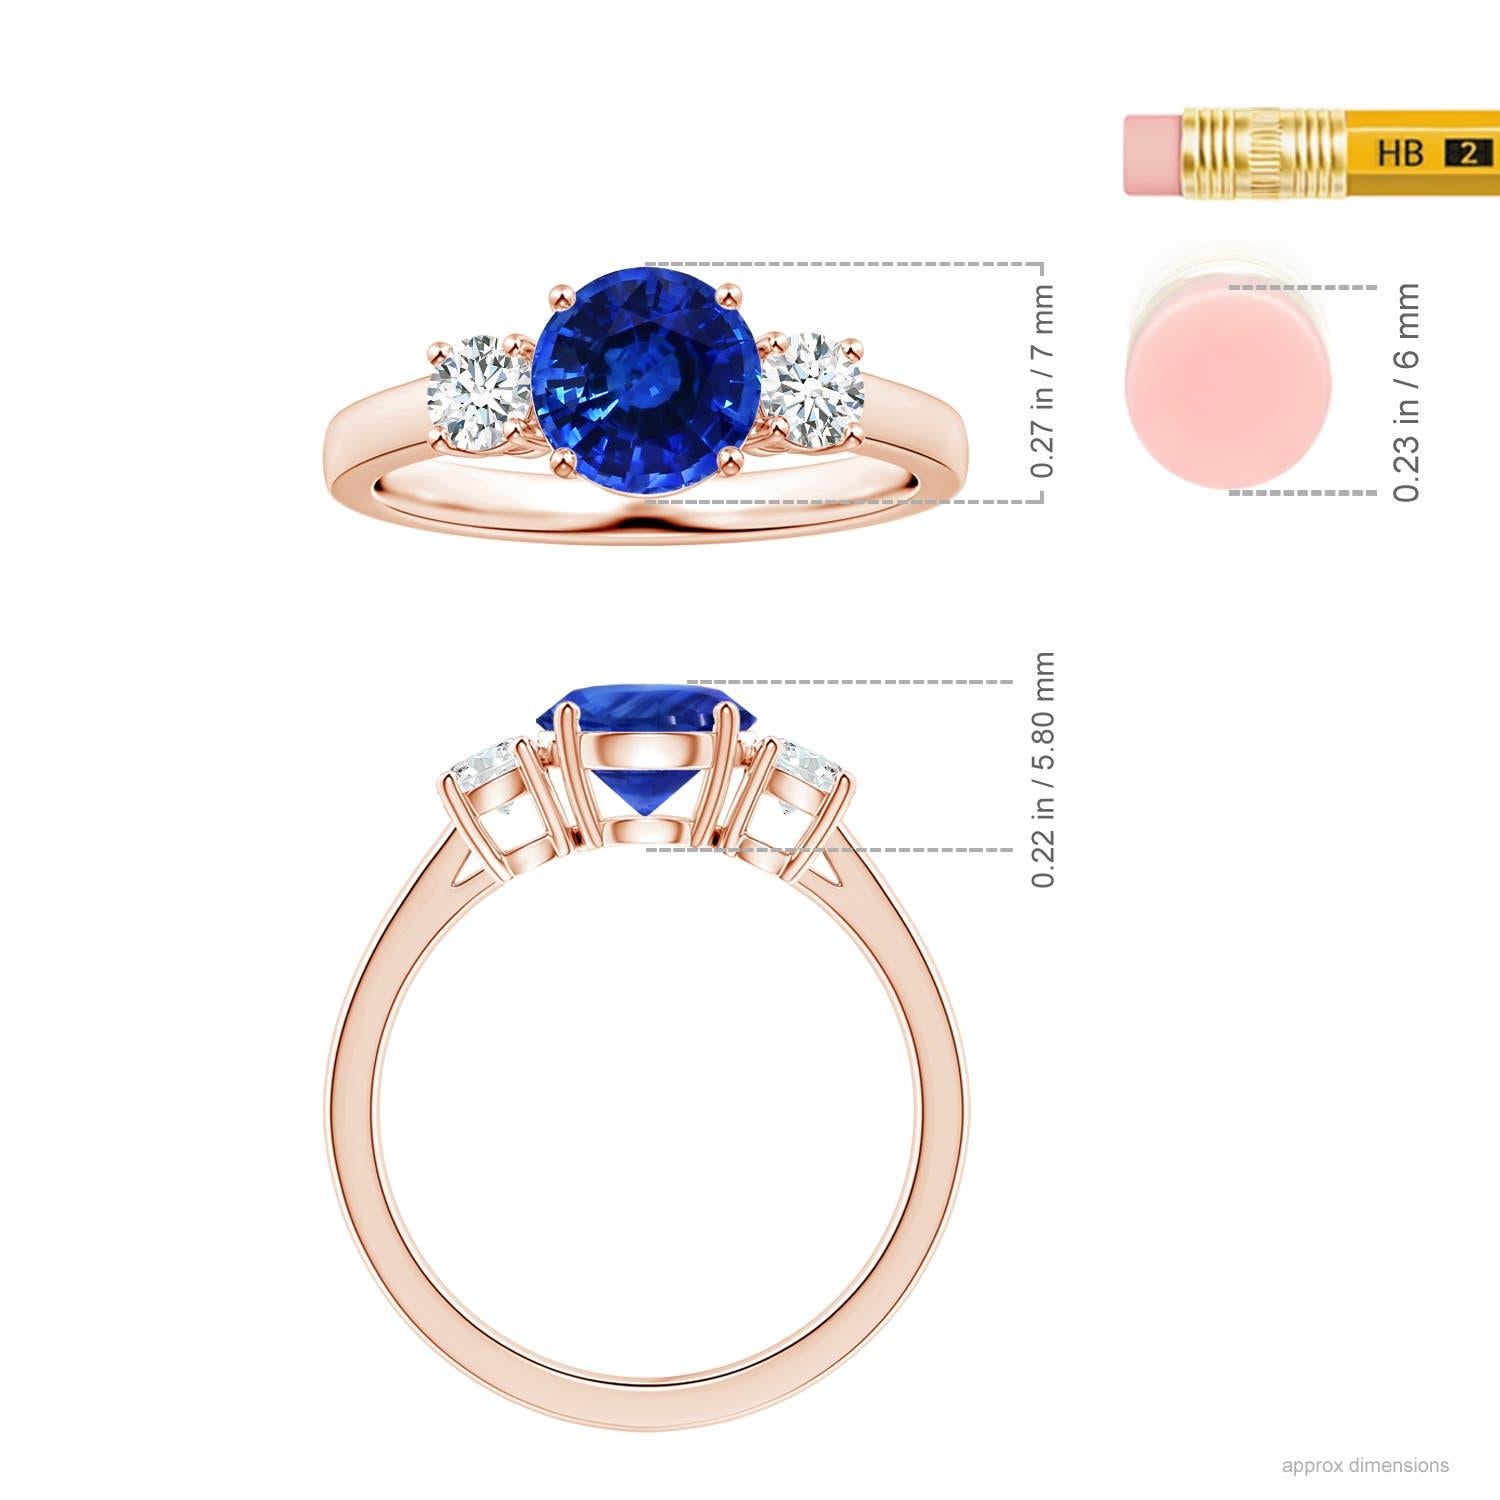 For Sale:  ANGARA Three stone GIA Certified Blue Sapphire Ring in Rose Gold with Diamonds 5